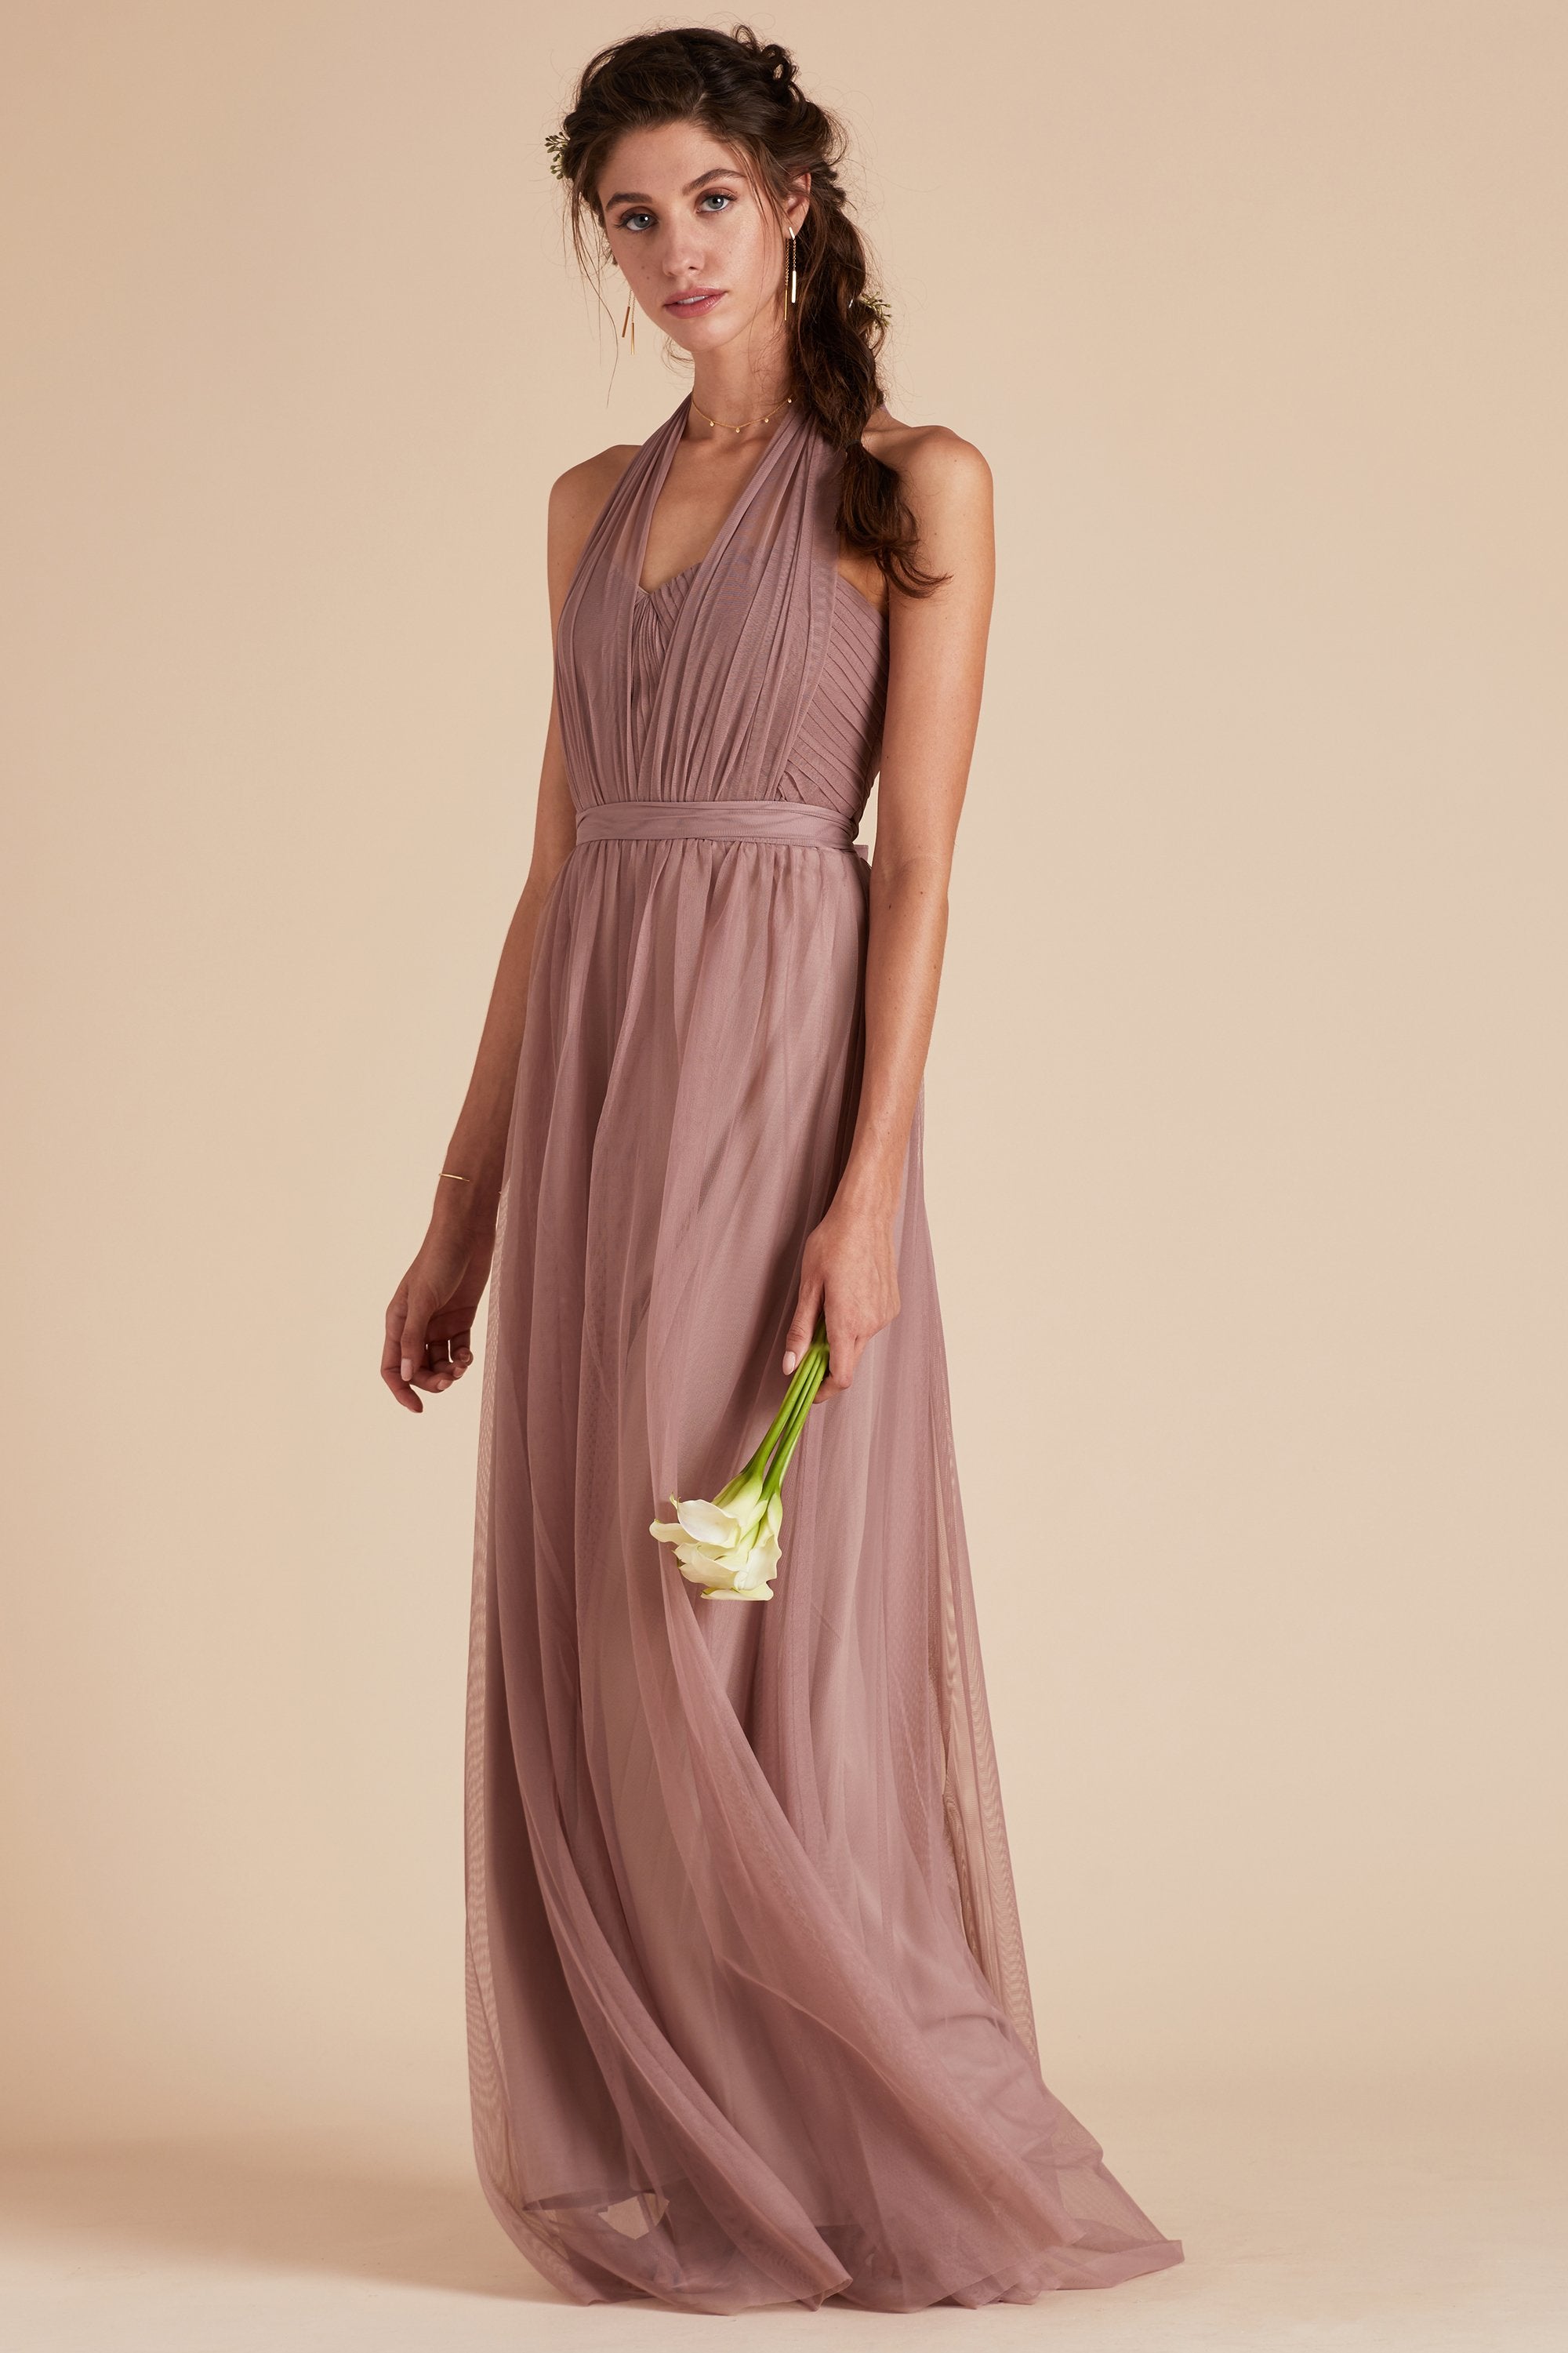 Christina convertible bridesmaid dress in sandy mauve tulle by Birdy Grey, front view